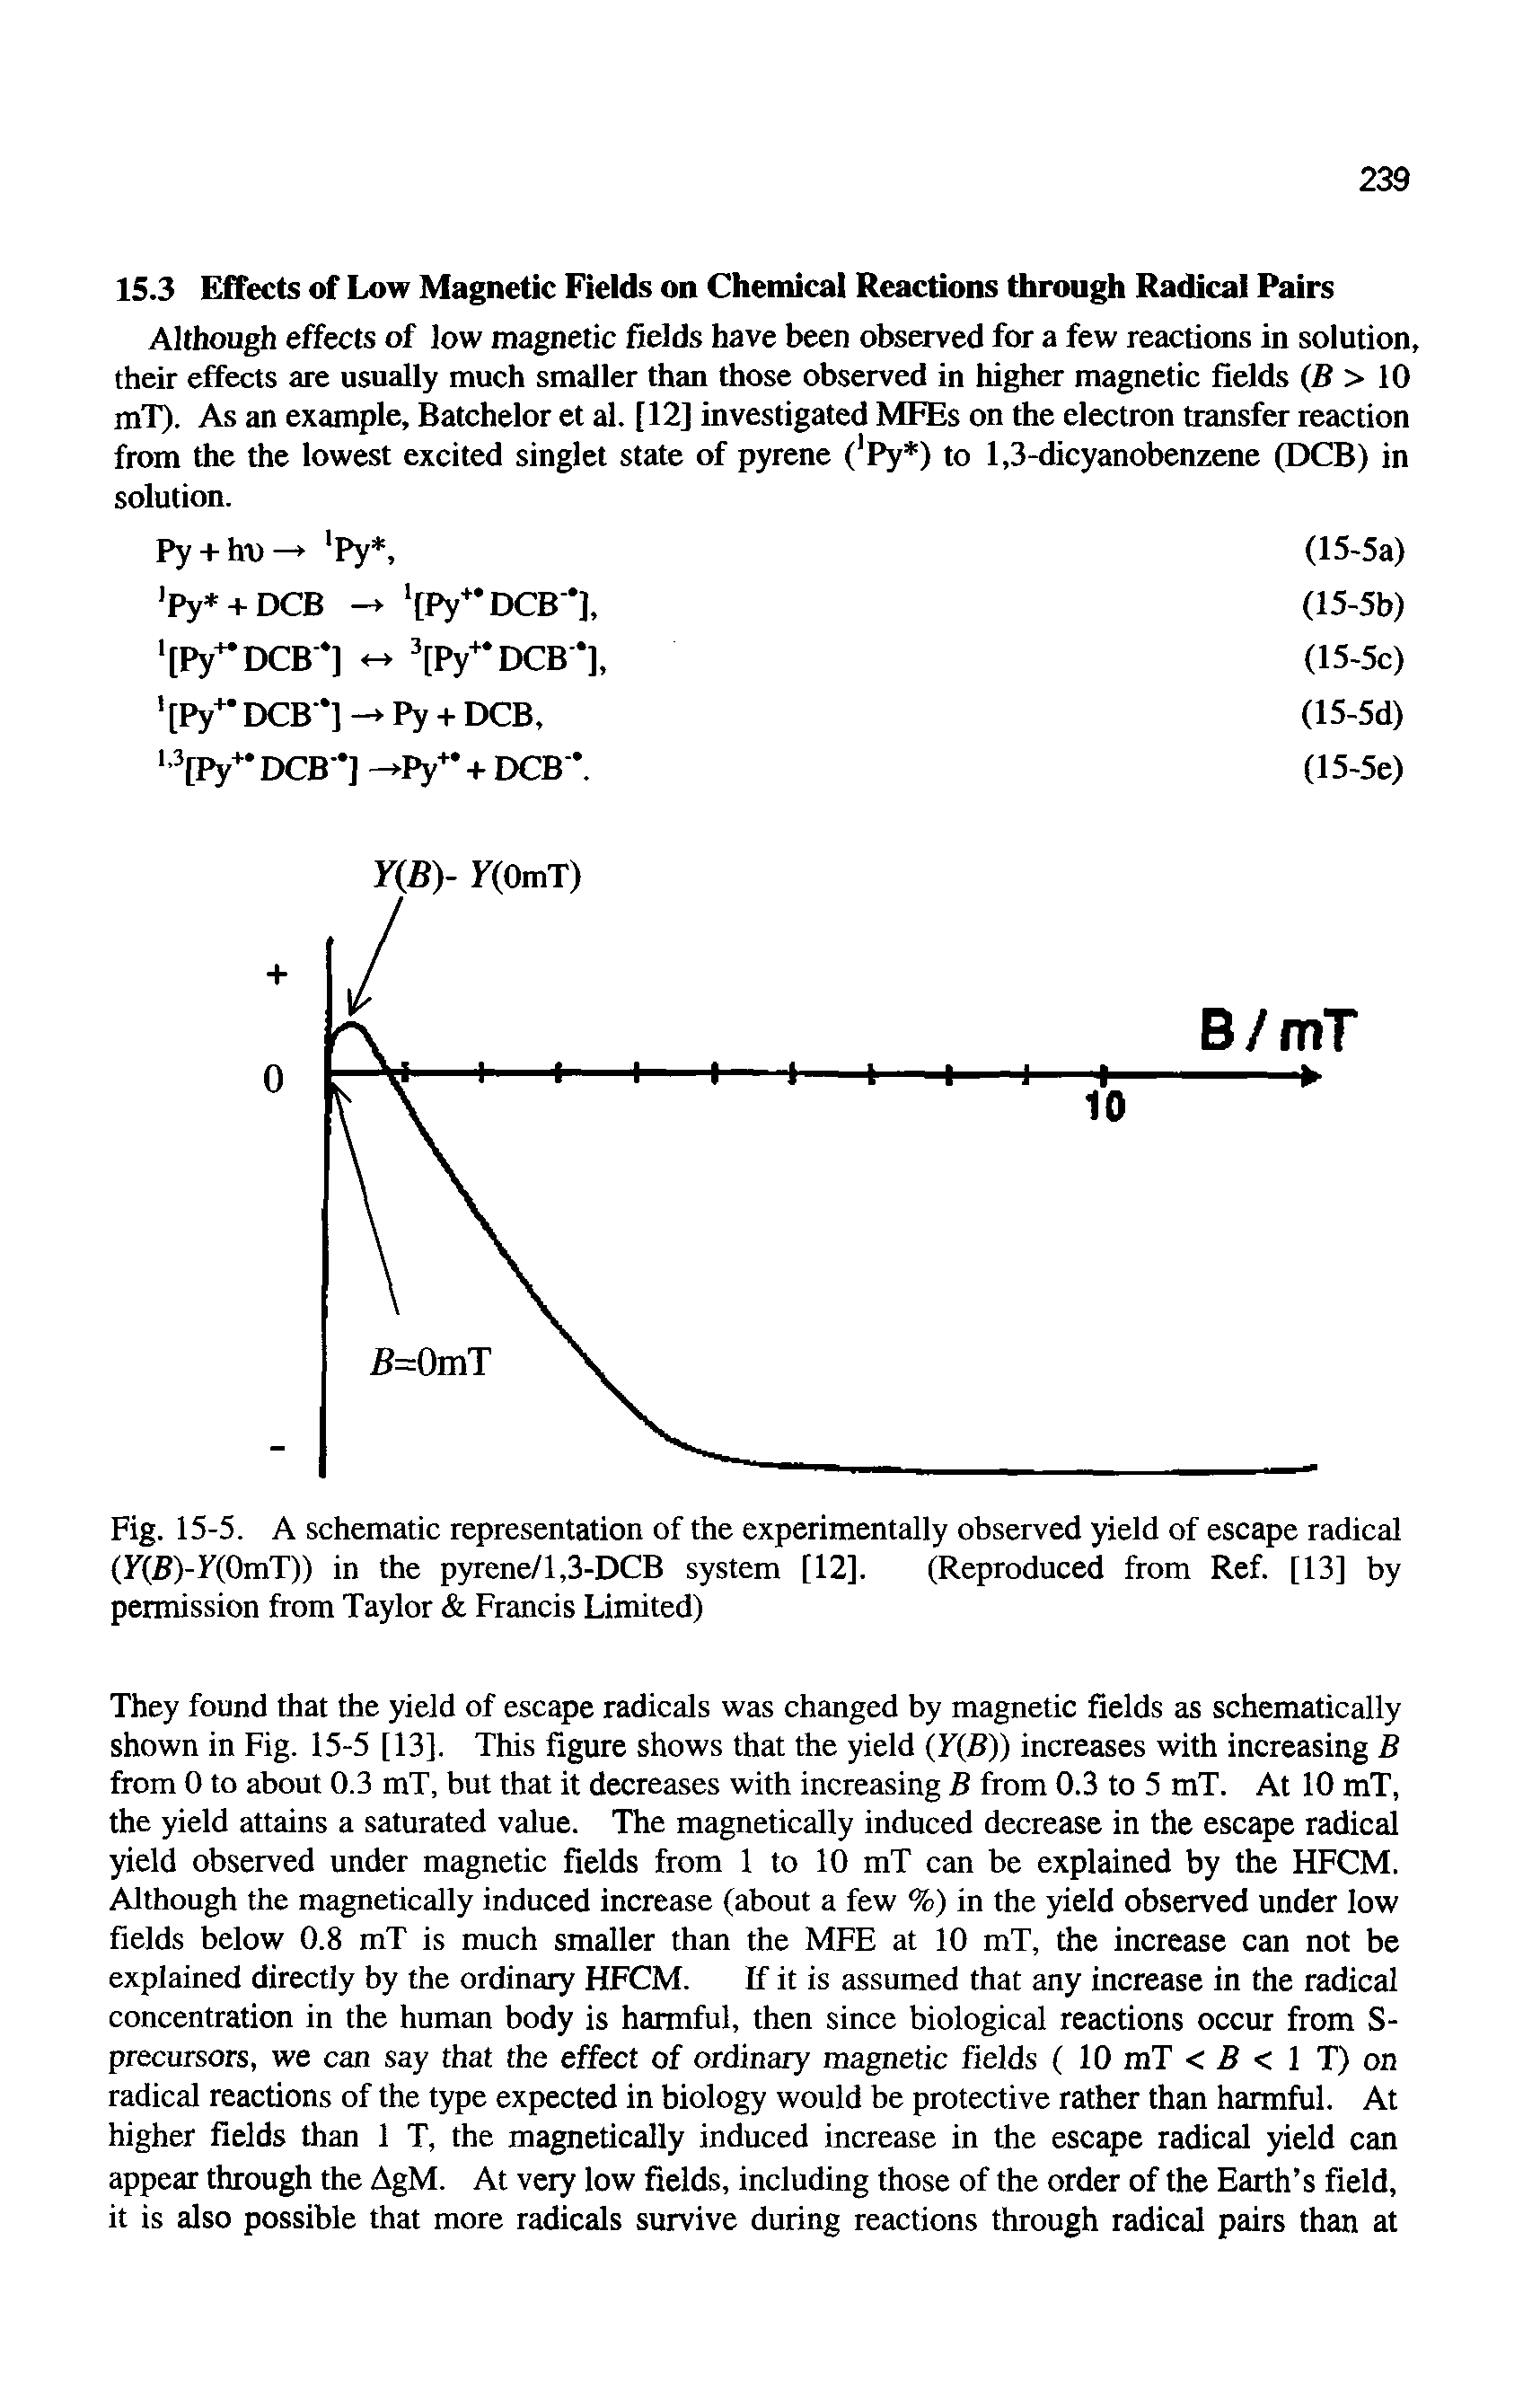 Fig. 15-5. A schematic representation of the experimentally observed yield of escape radical (y(5)-y(0mX)) in the pyrene/l,3-DCB system [12]. (Reproduced from Ref. [13] by permission from Taylor Francis Limited)...